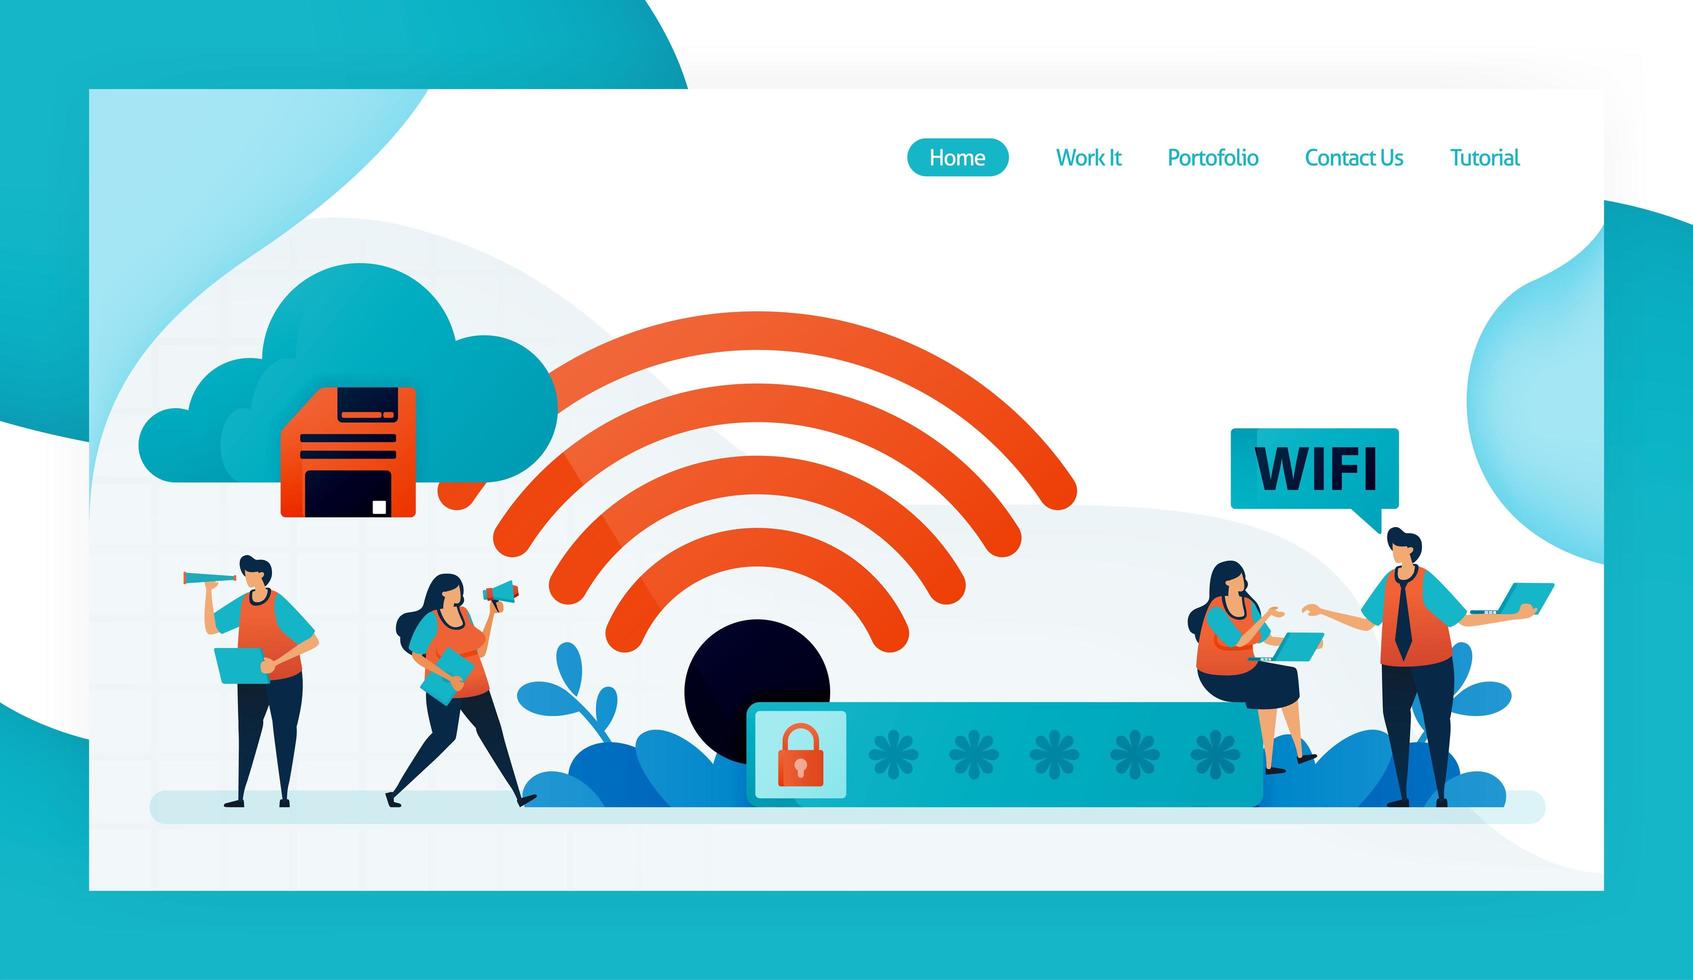 landing page and website for wifi connection and protection, internet access with wifi, wifi firewall security with password, security access and connection. vector design flyer poster mobile apps ads